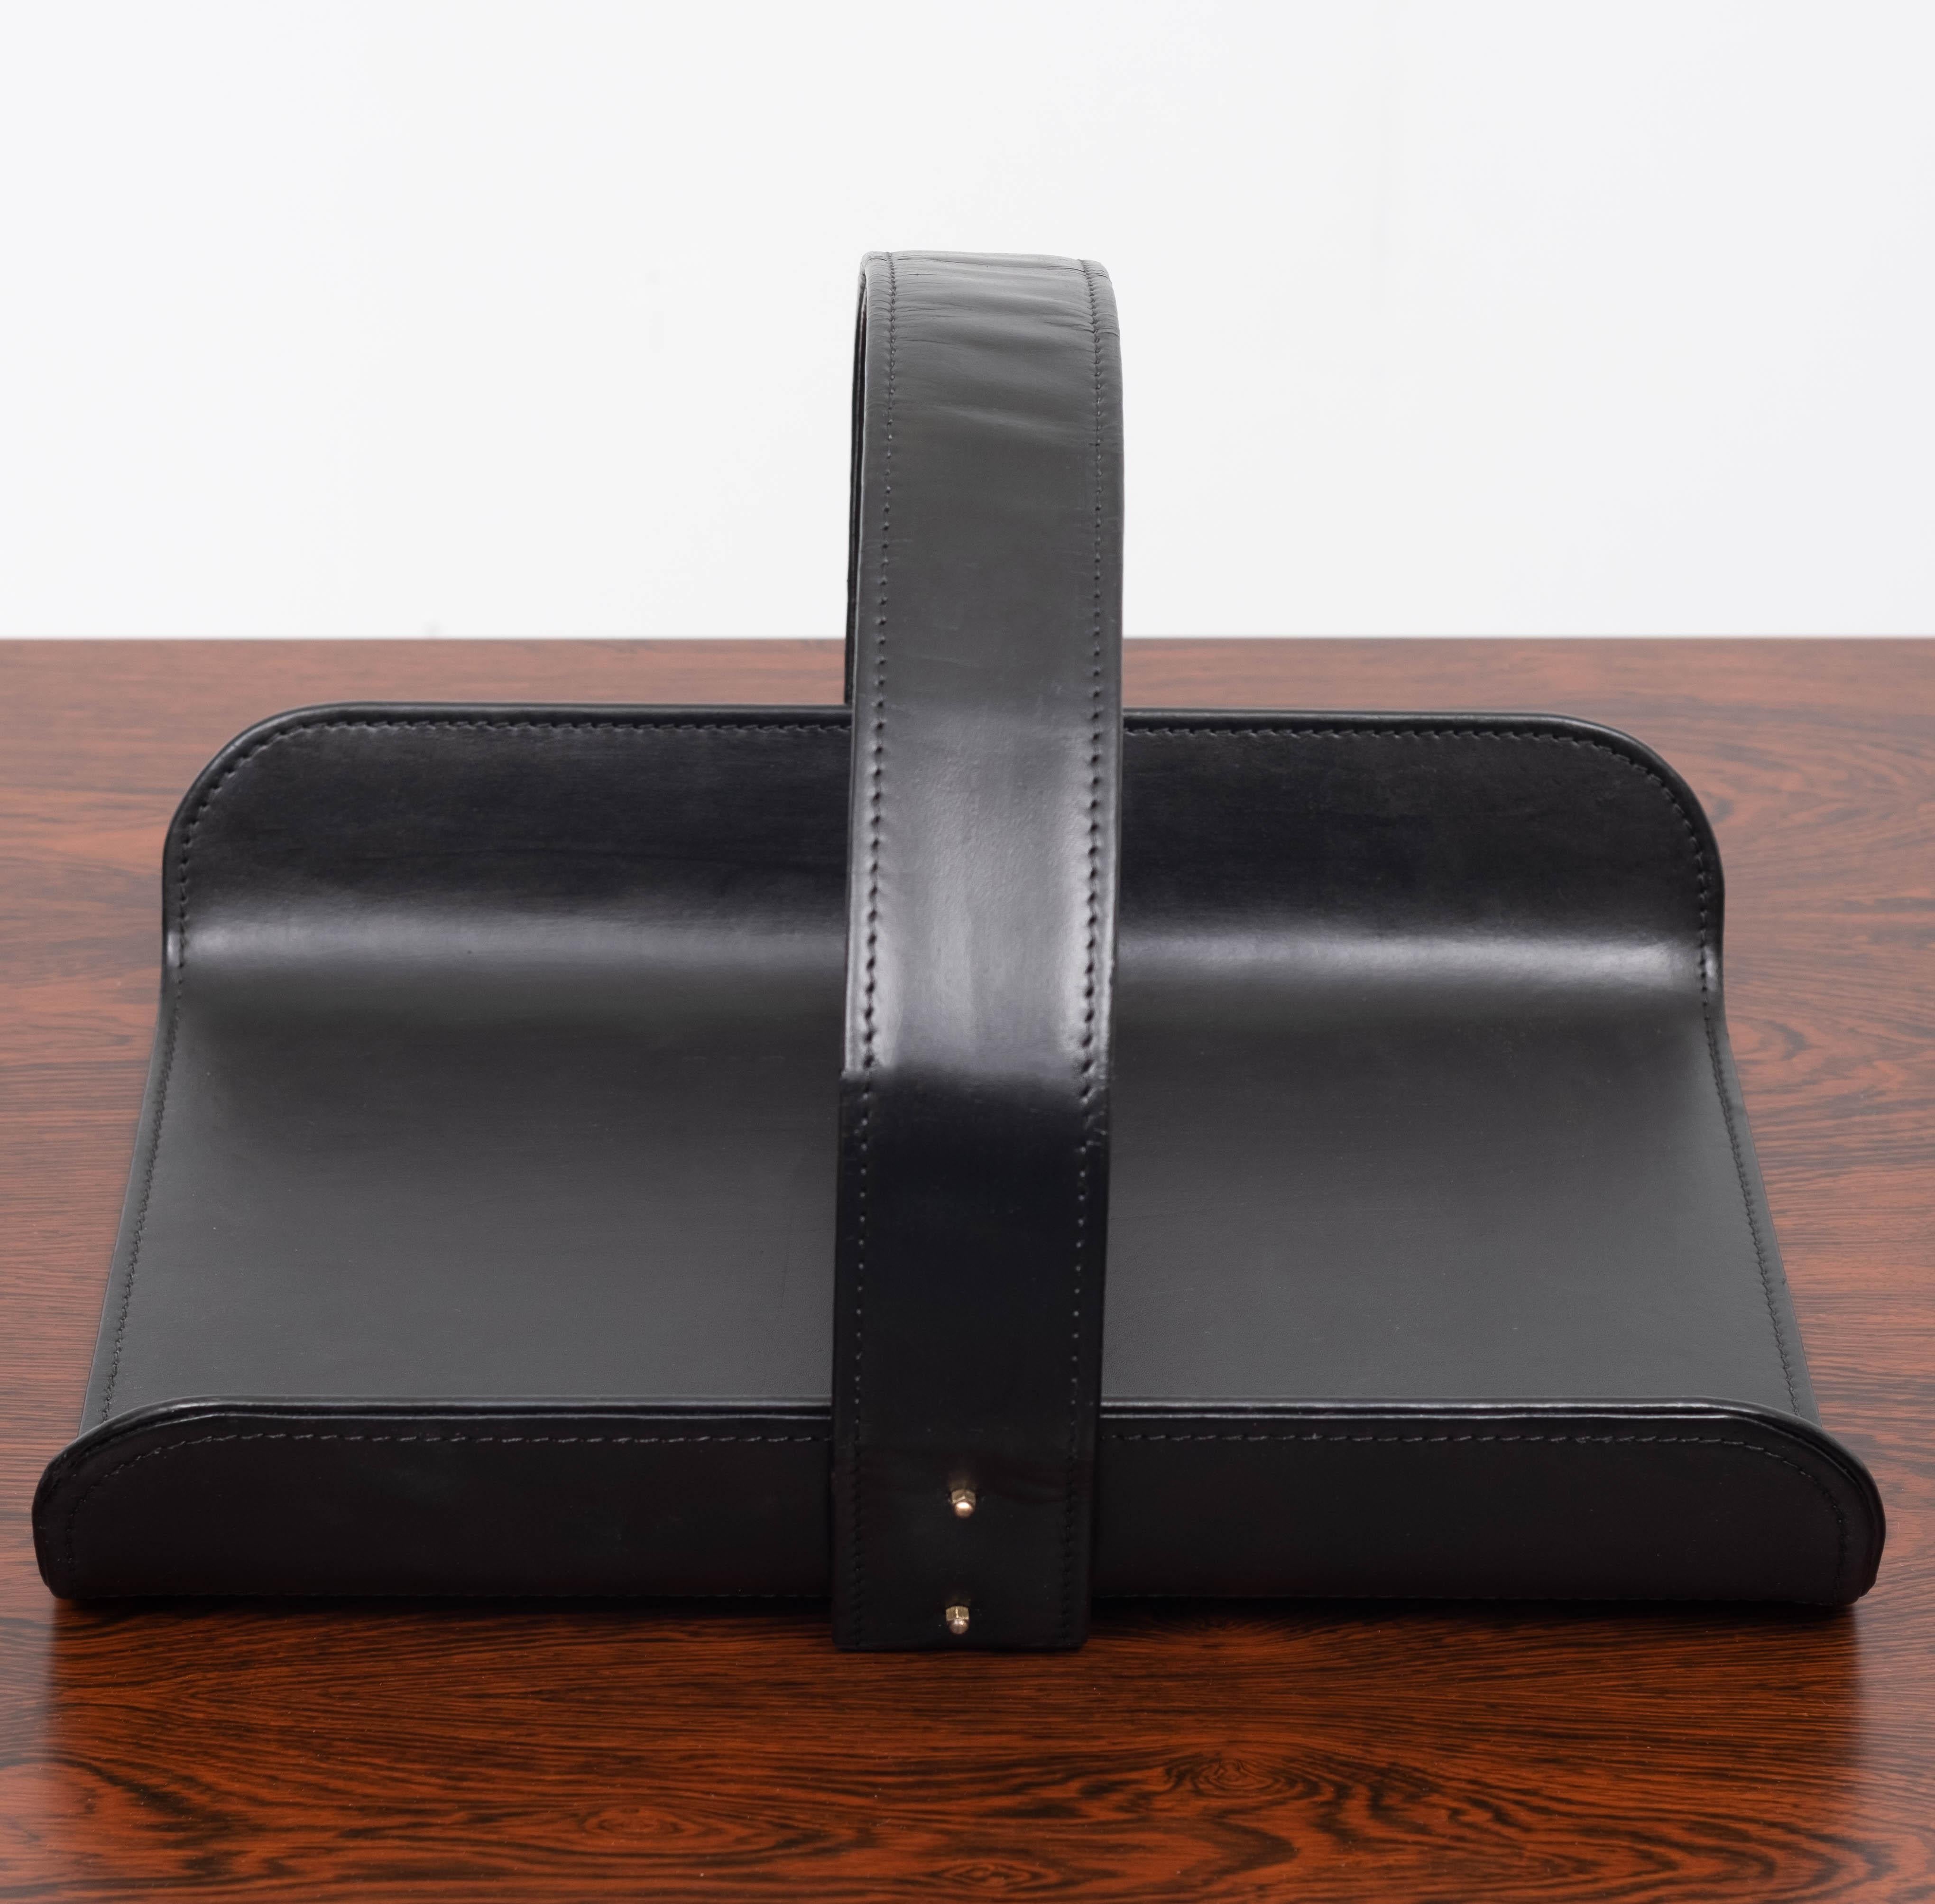 Stich black leather magazine holder. Metal base covert with leather. Brass details.
Nice stylish piece. Good condition.